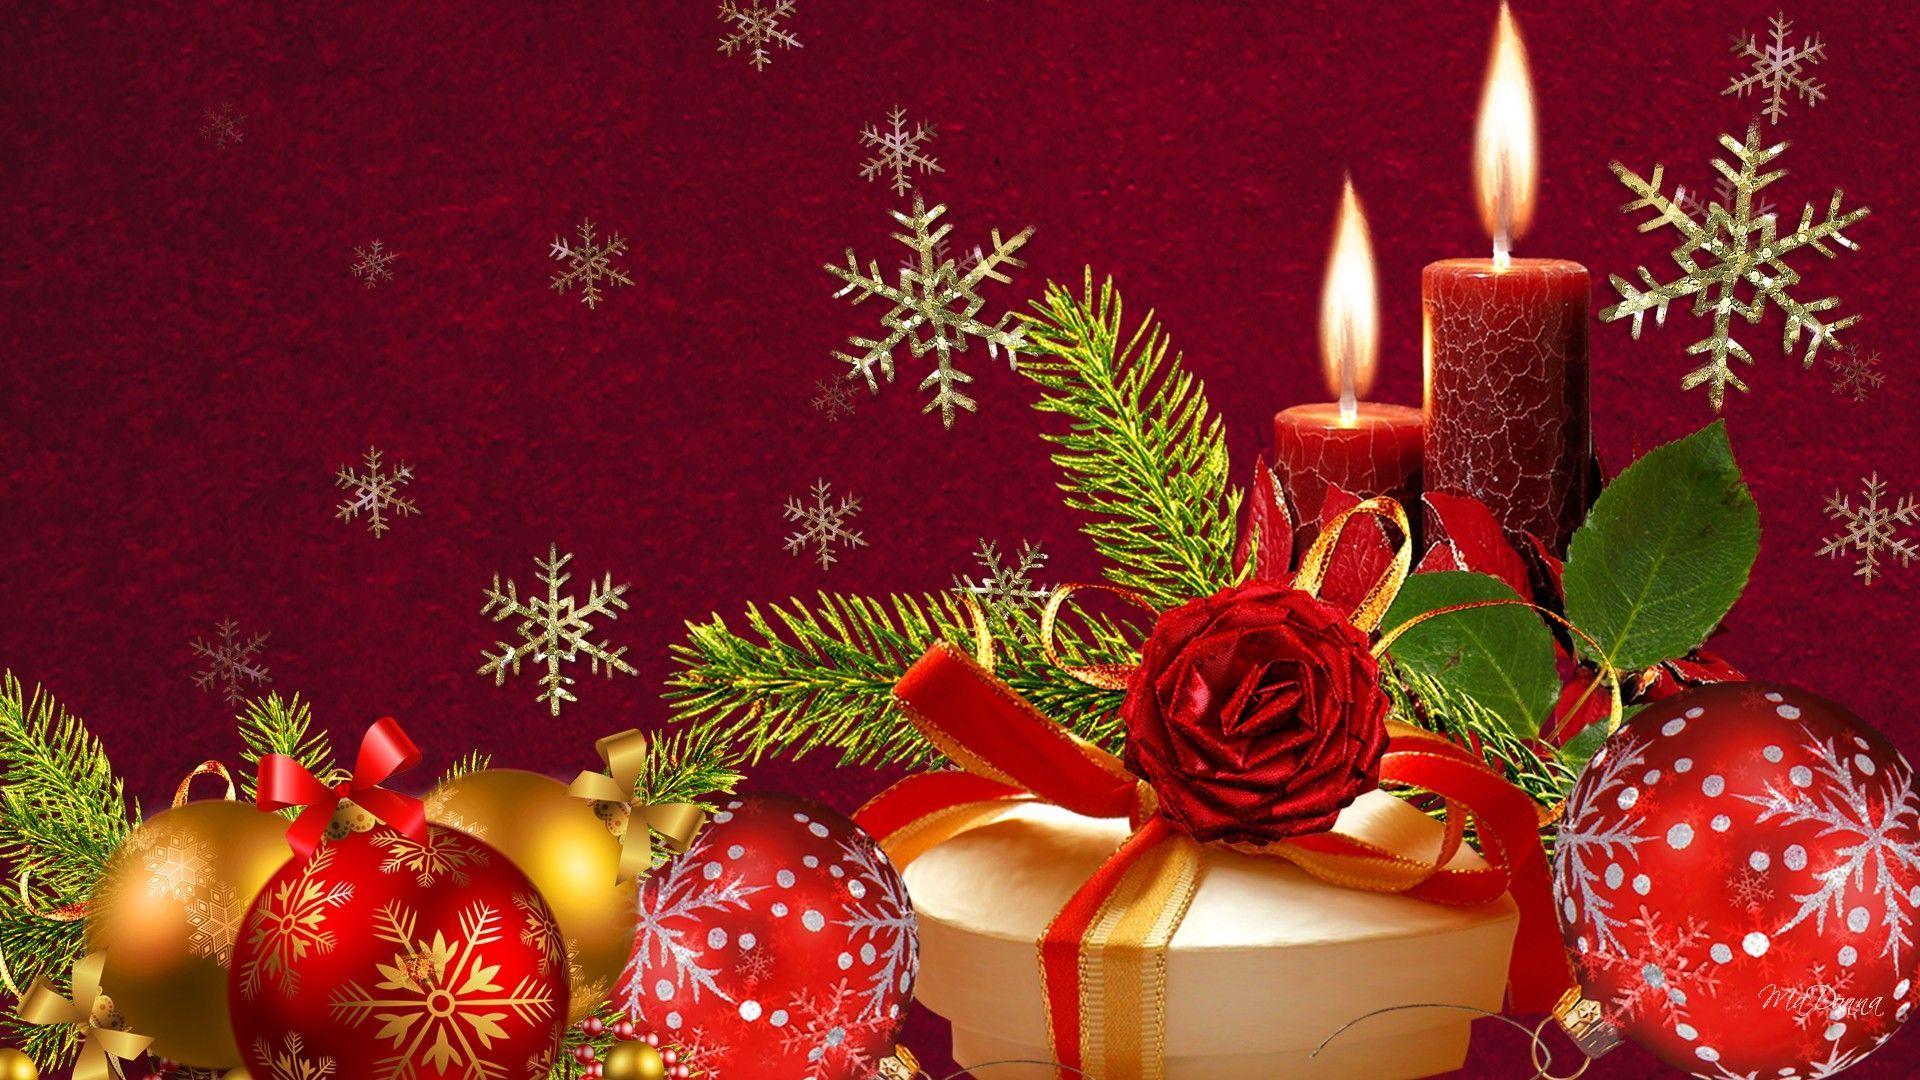 Merry Christmas  Red and Green 4K wallpaper download